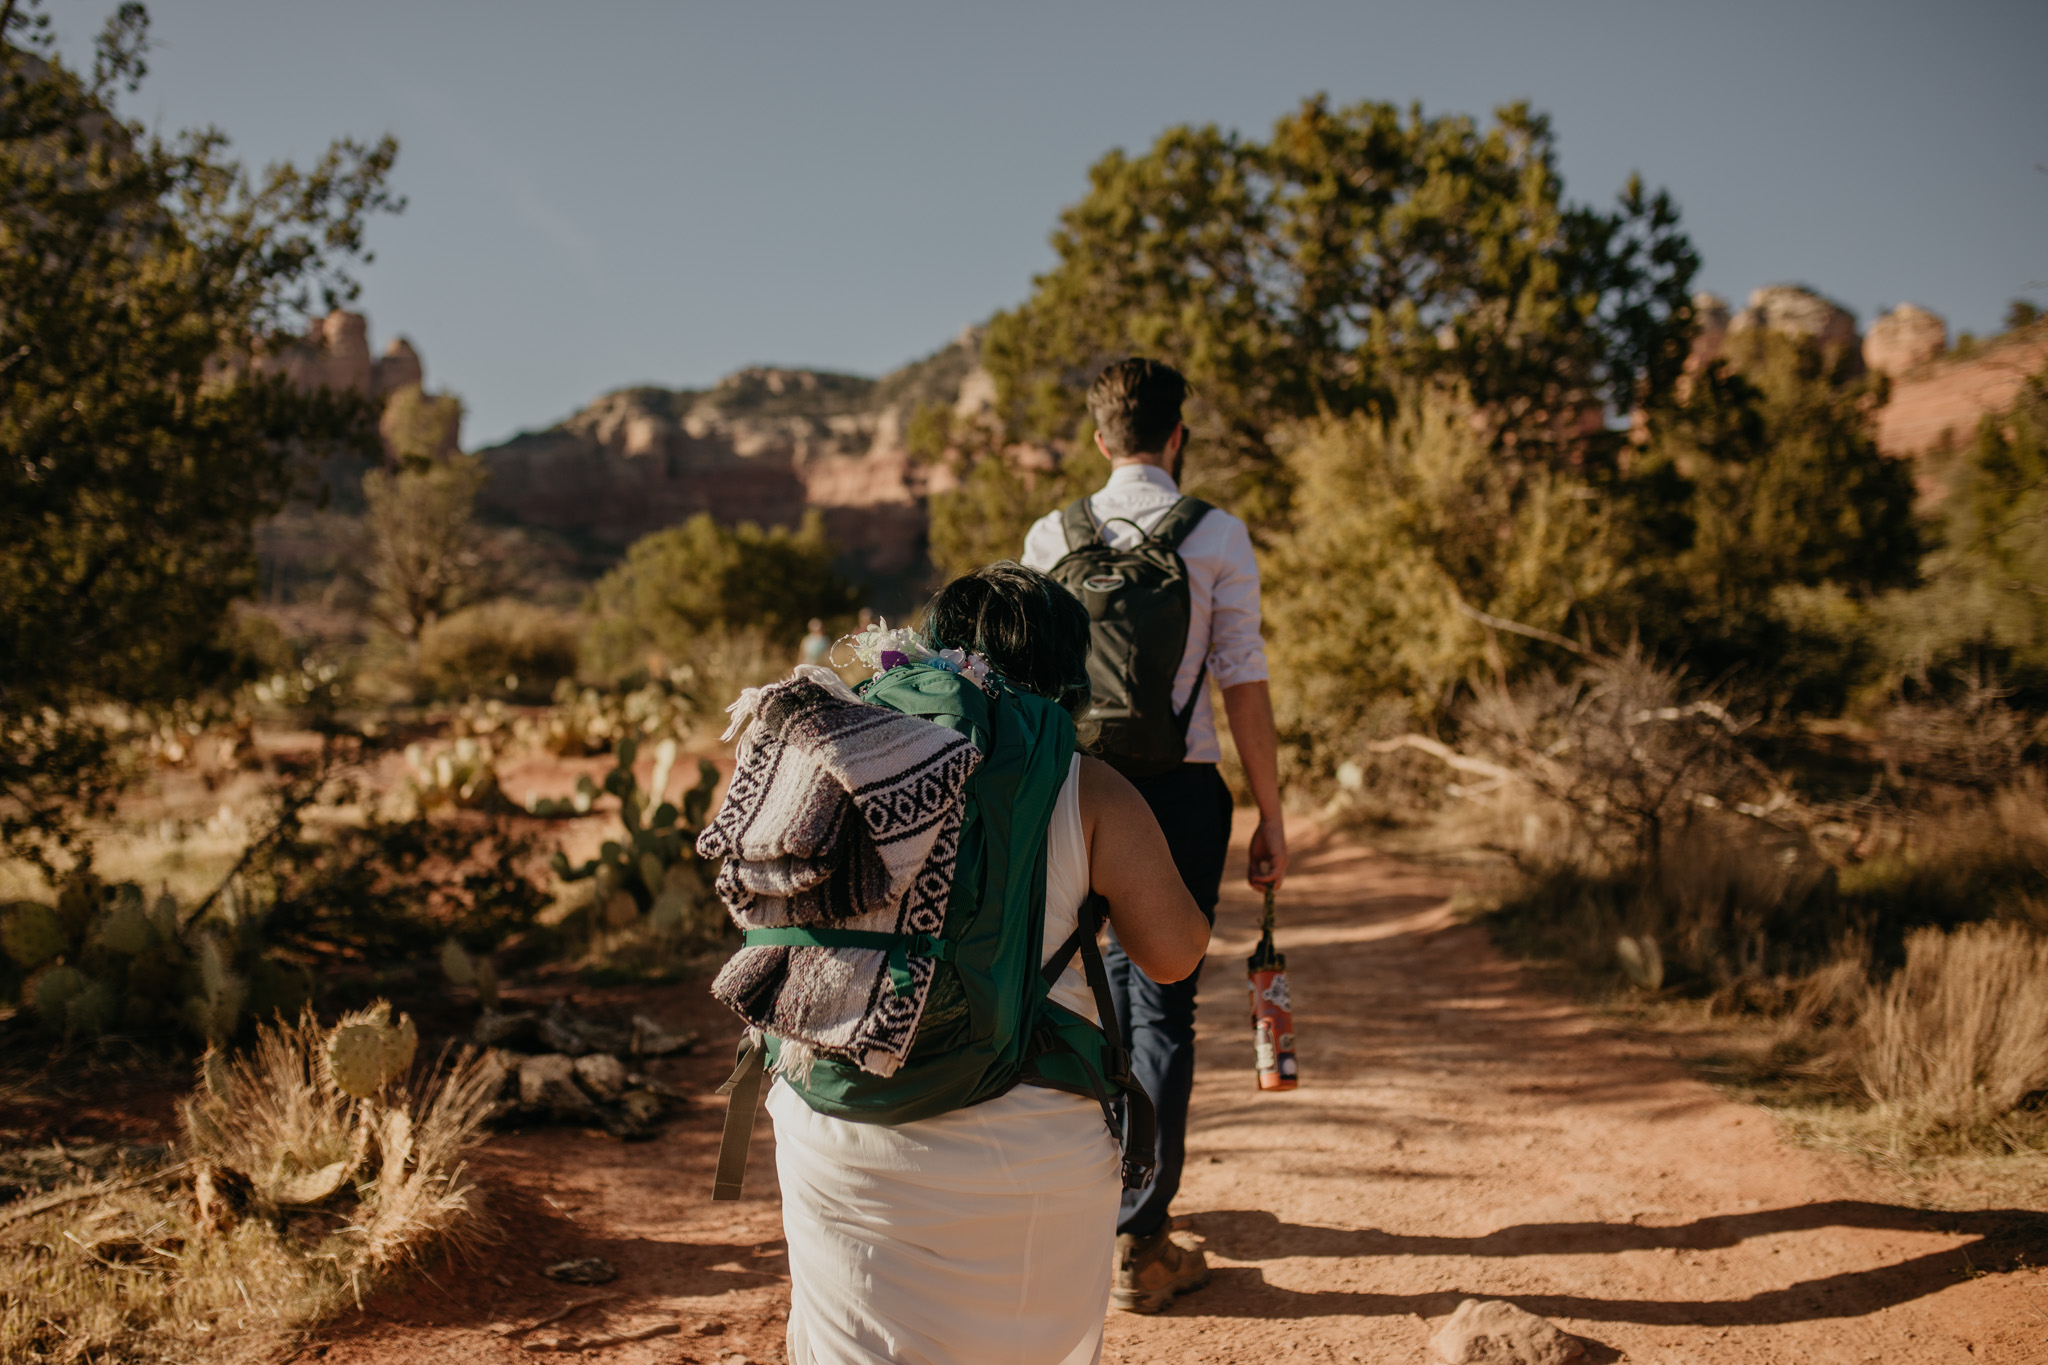 A Sedona Elopement - Hiking through the red rock mountains